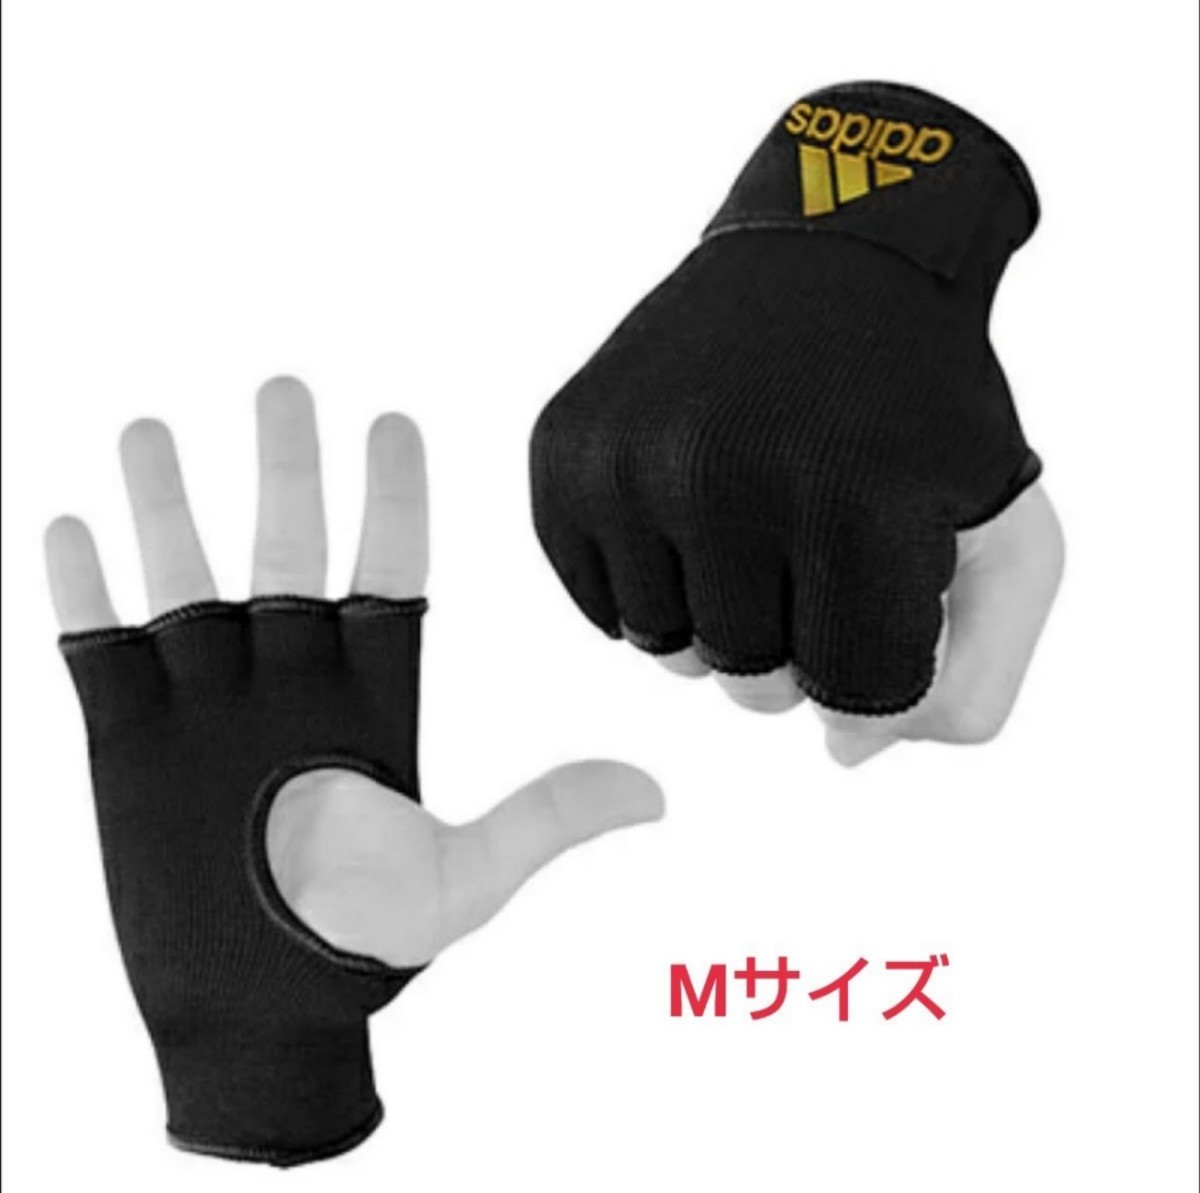  Adidas boxing inner glove M size black × Gold left right 1 collection 